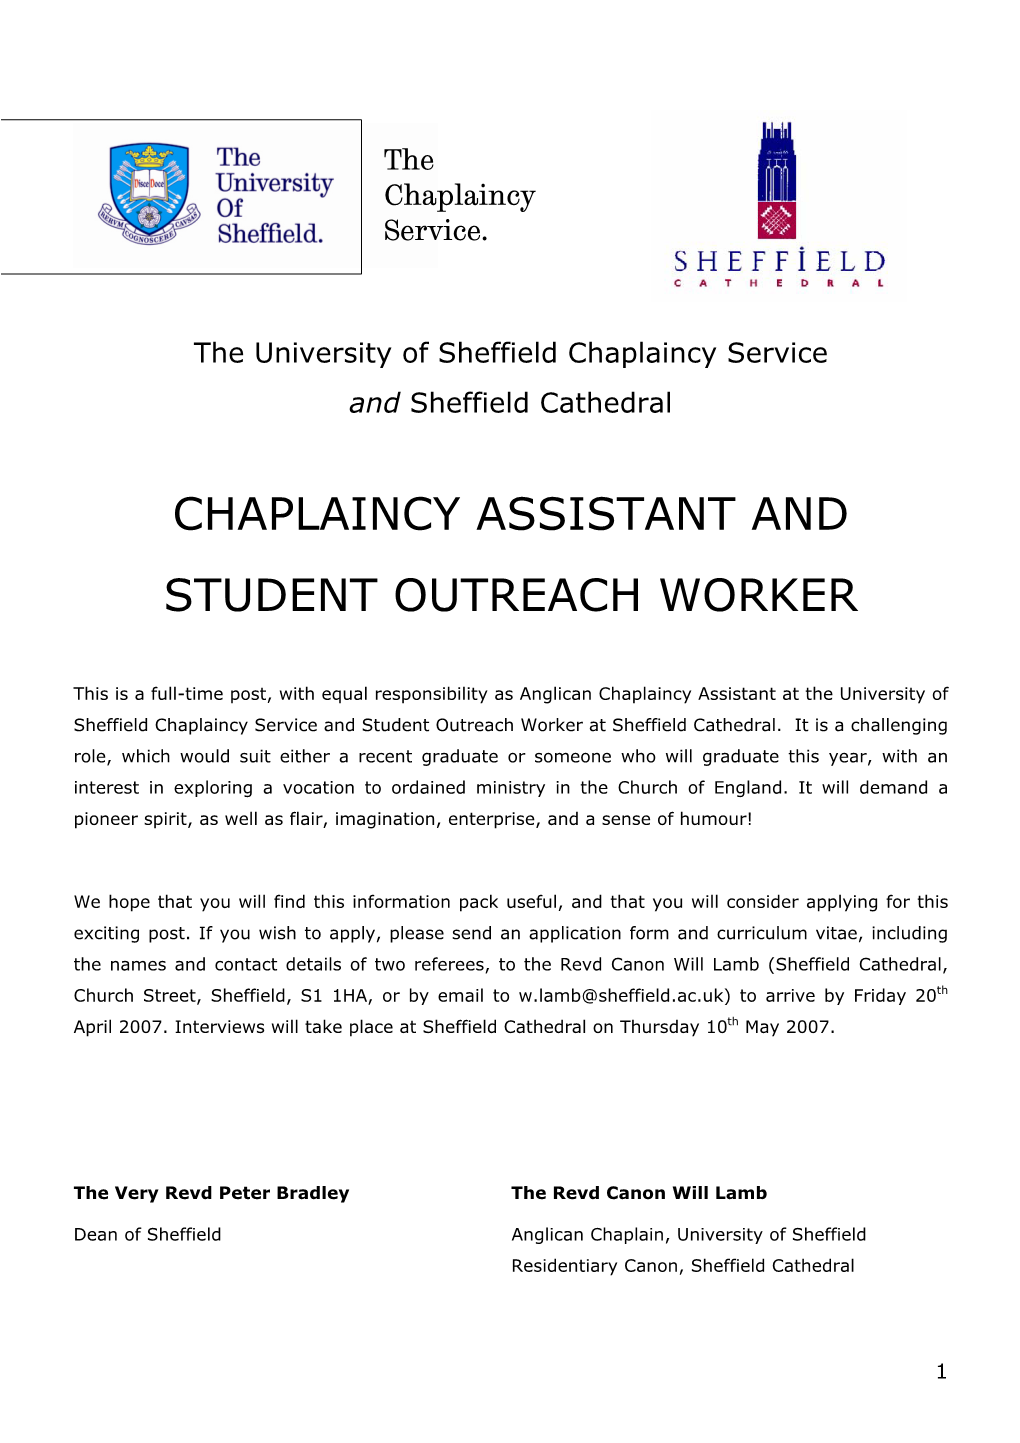 Chaplaincy Assistant and Student Outreach Worker